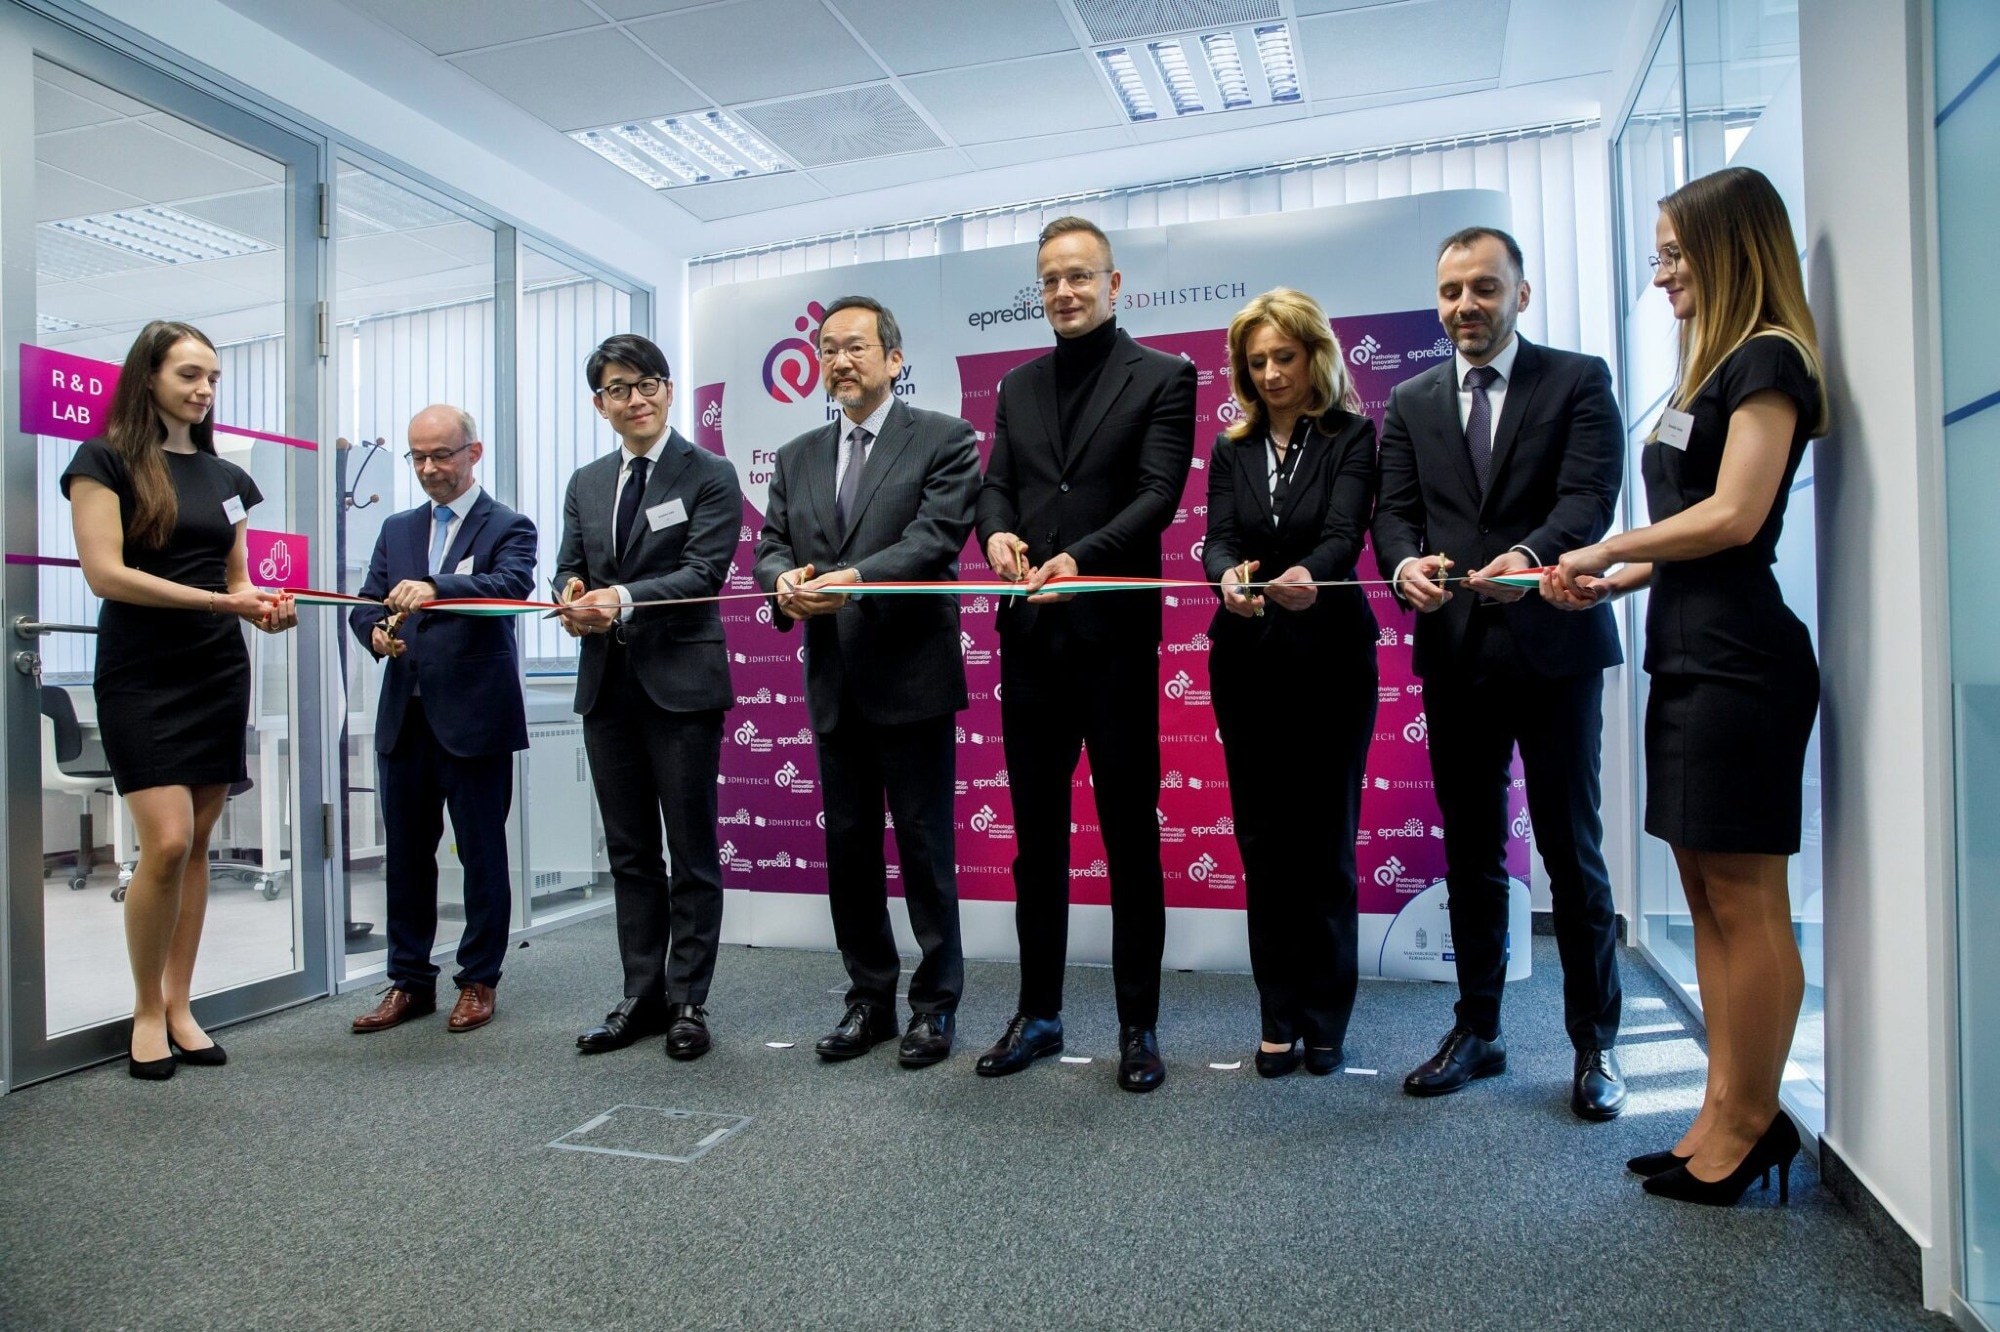 3DHISTECH and Epredia open pathology innovation incubator to accelerate advancements in cancer diagnostics